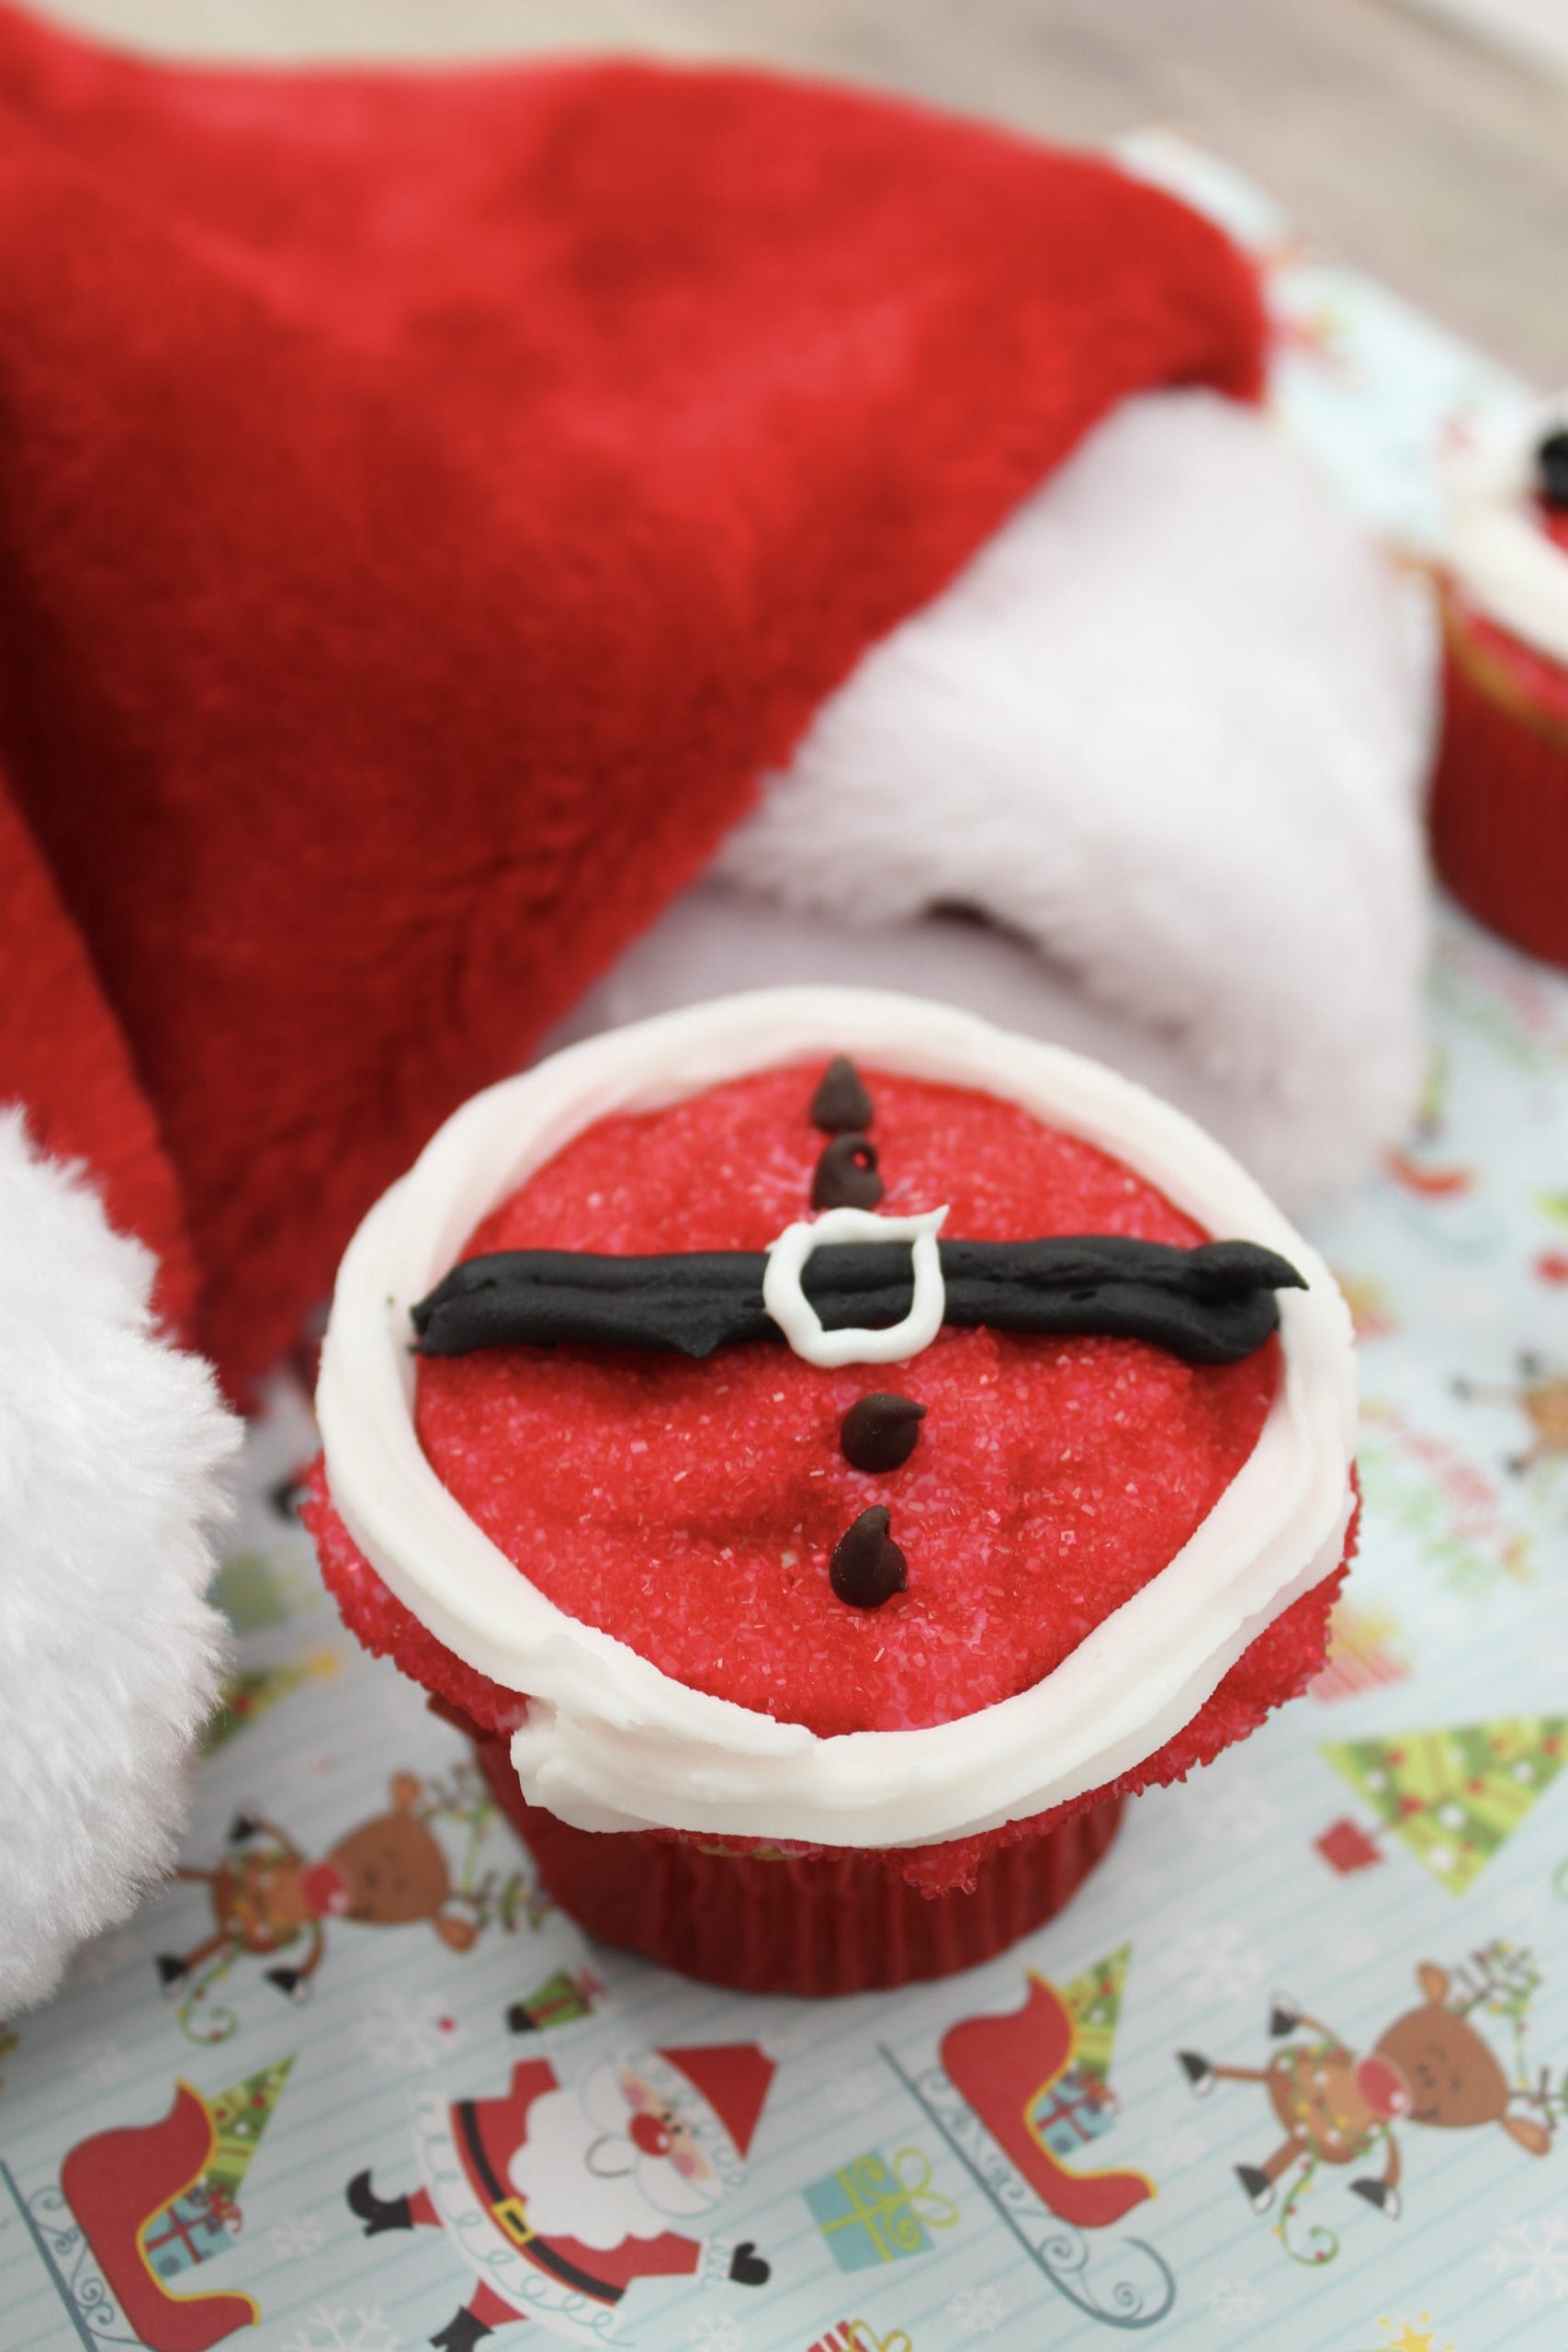 Need a fun Christmas treat to take to your next holiday get together? These Santa Belt Cupcakes are easy to make and everyone will be talking about them.